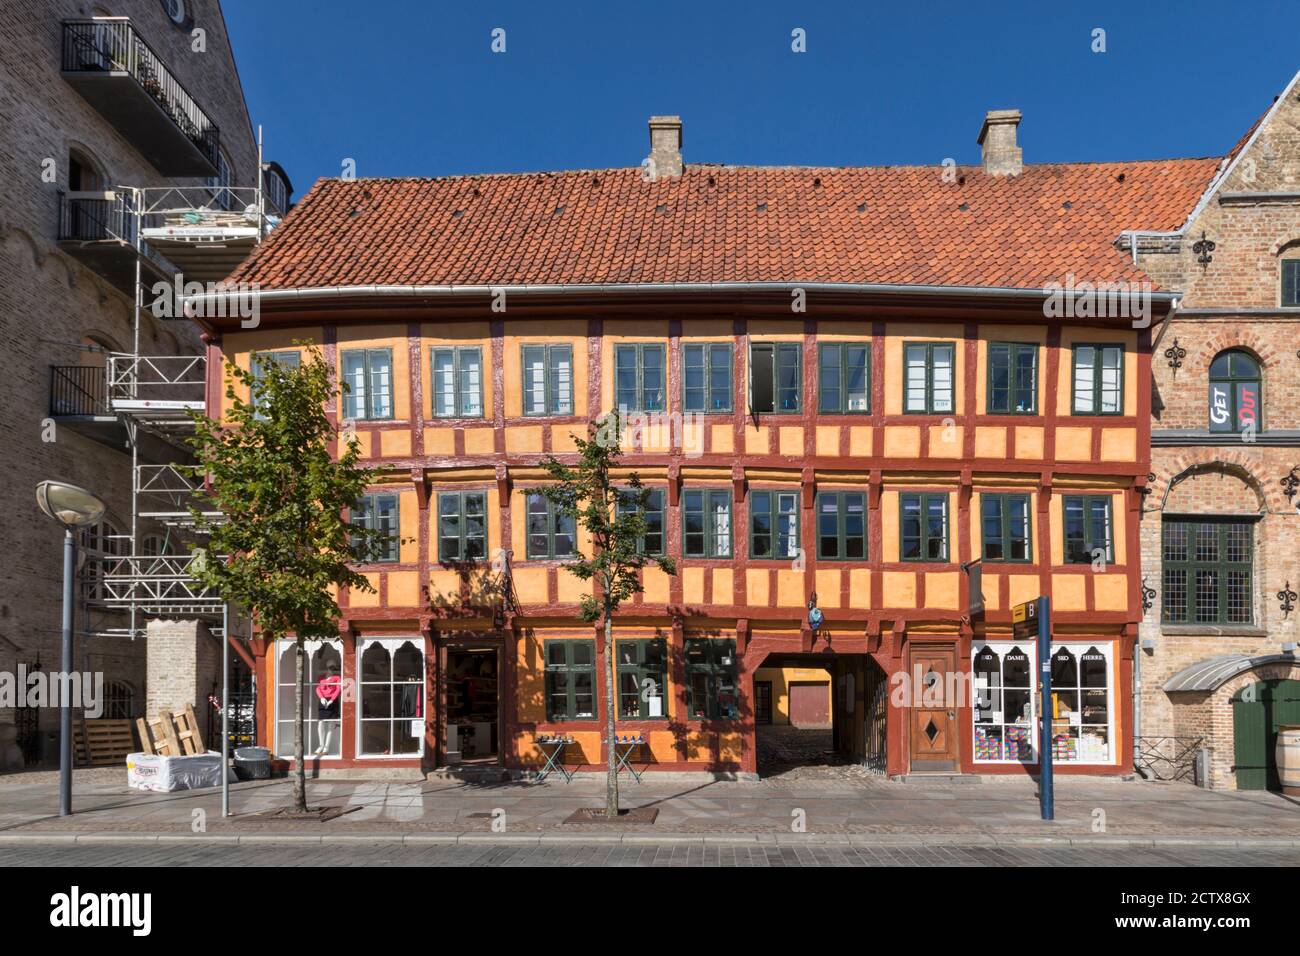 Aalborg, Denmark - September 1, 2020: Jørgen Olufsens house, a former warehouse built and owned by the city’s mayor  in 17th century Stock Photo